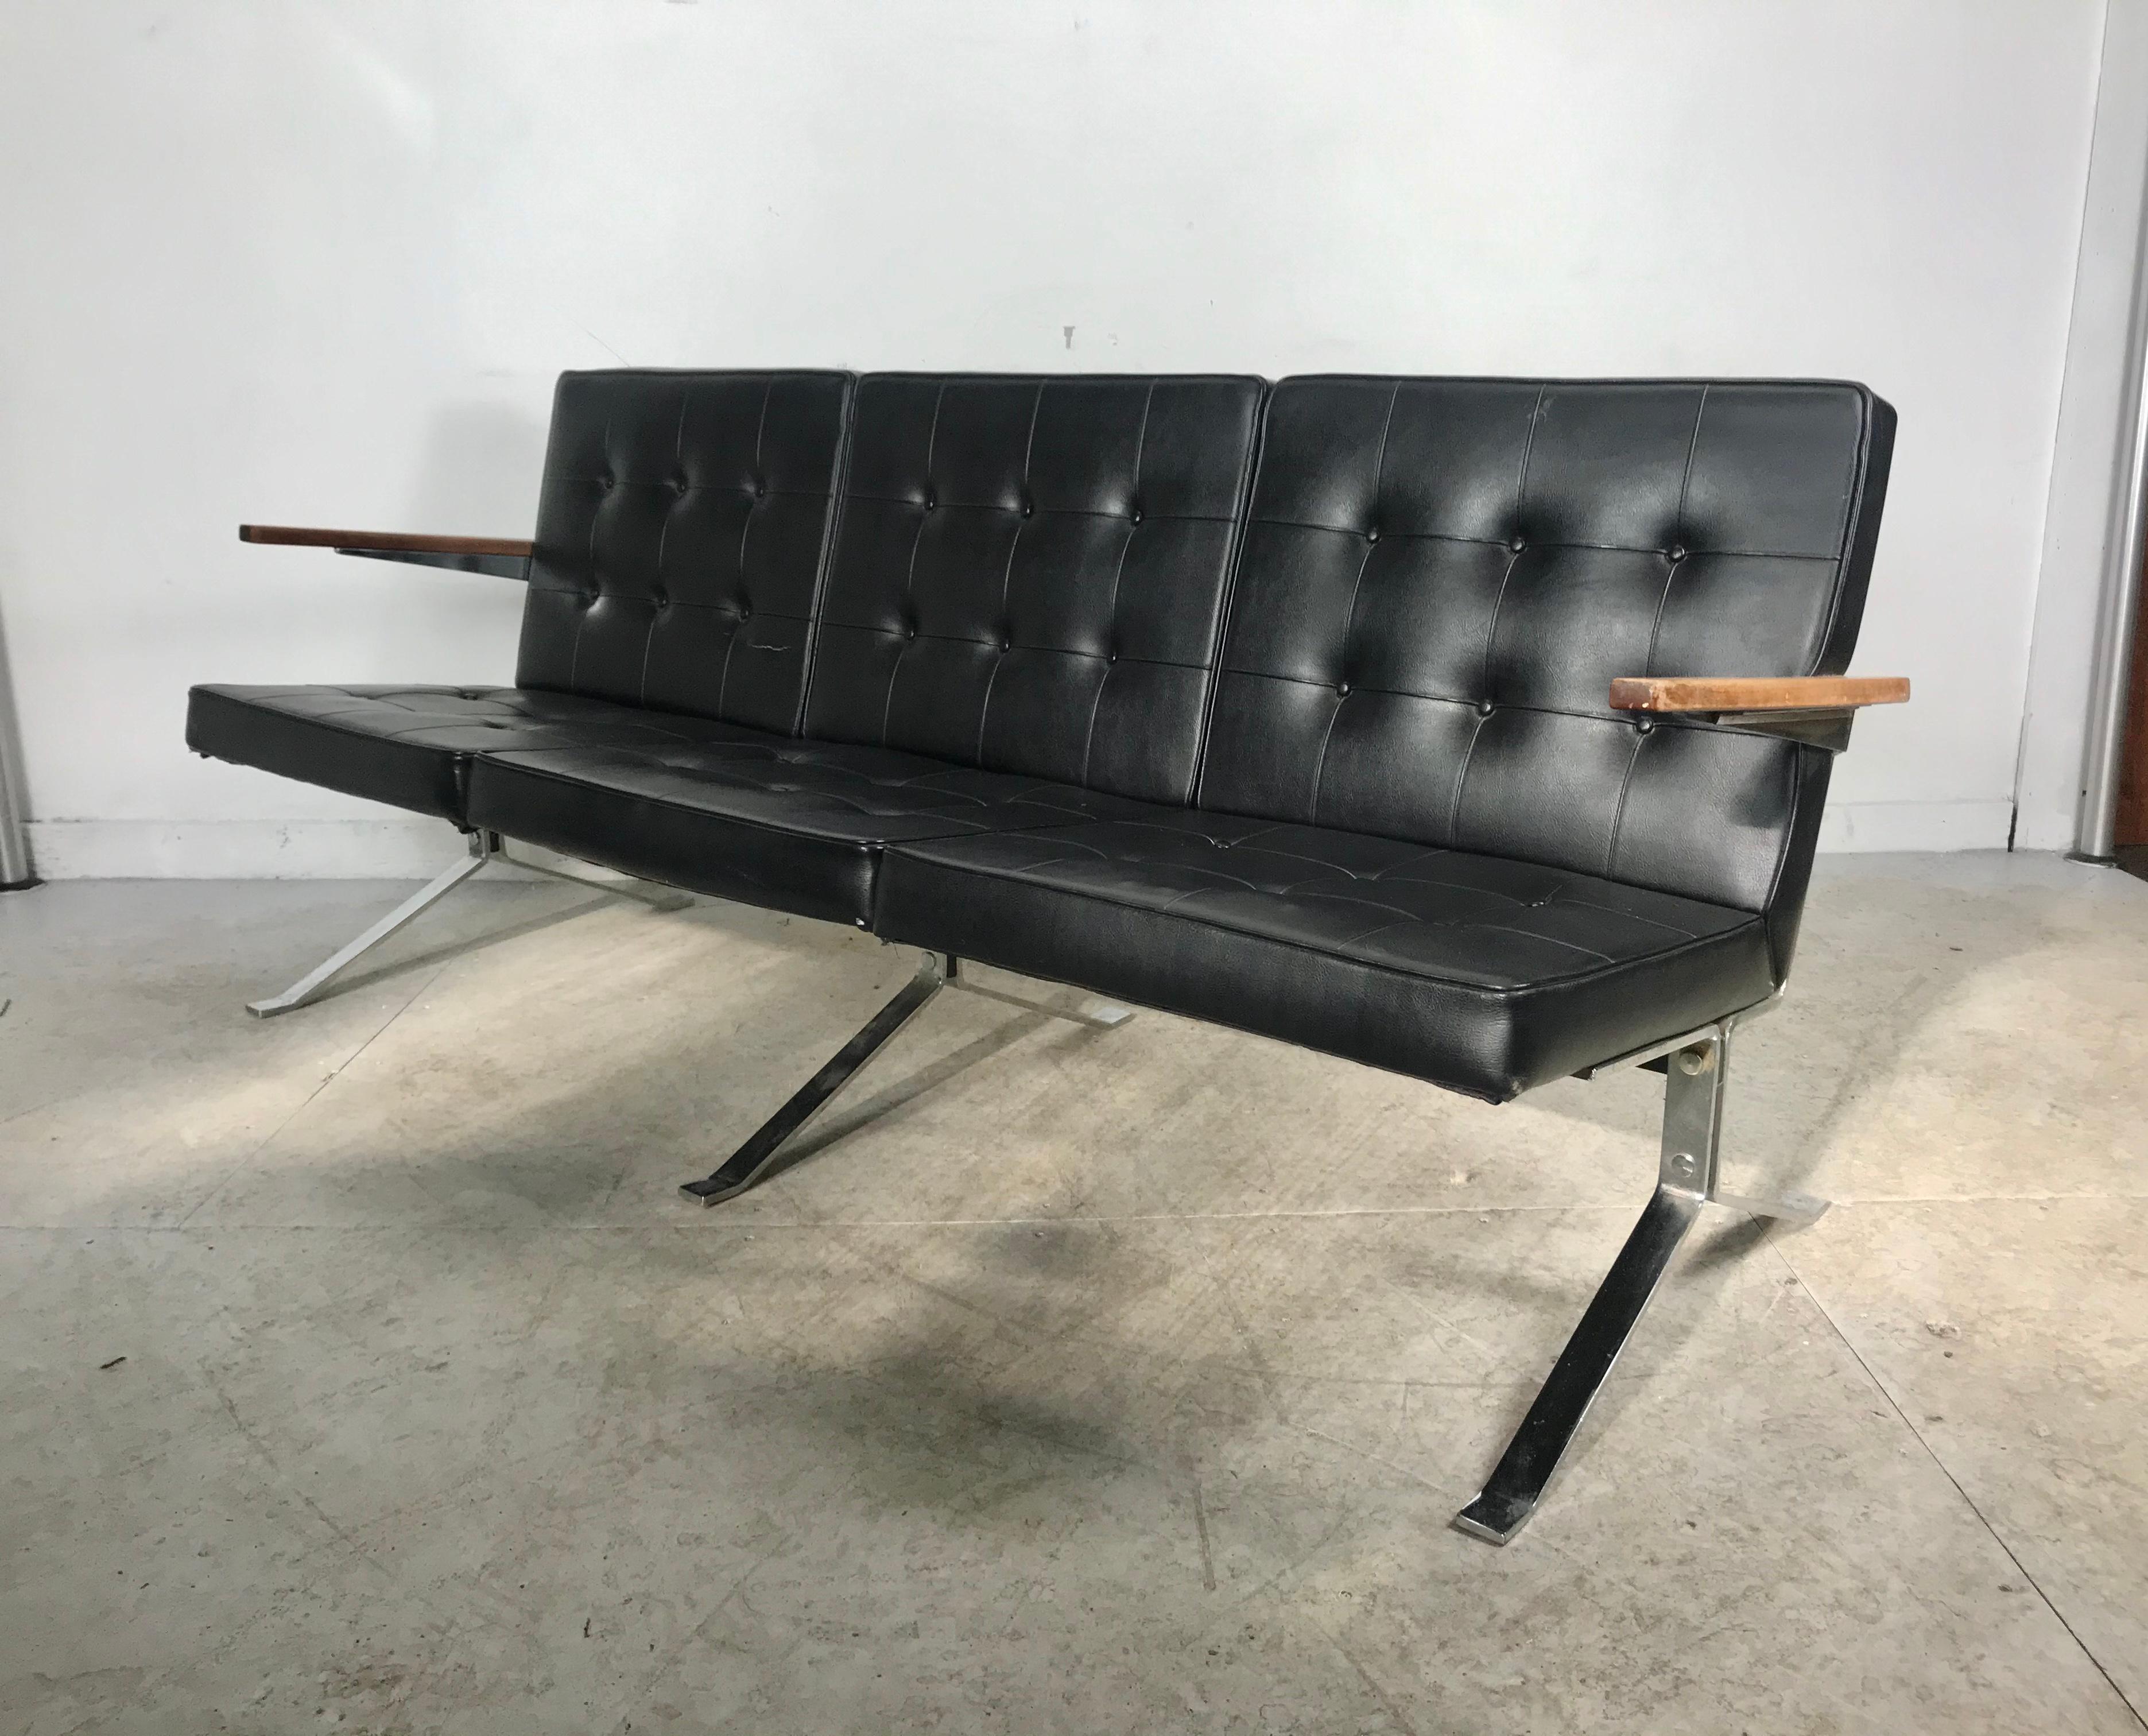 Classic 1960s modernist, Space Age black and chrome bench Sette. Reminiscent of the Classic designs of Arne Norell, Nelson Knoll. Black tufted Naugahyde seat and back, heavy chromed steel base. Wooden arms. Minor retains original upholstery, minor